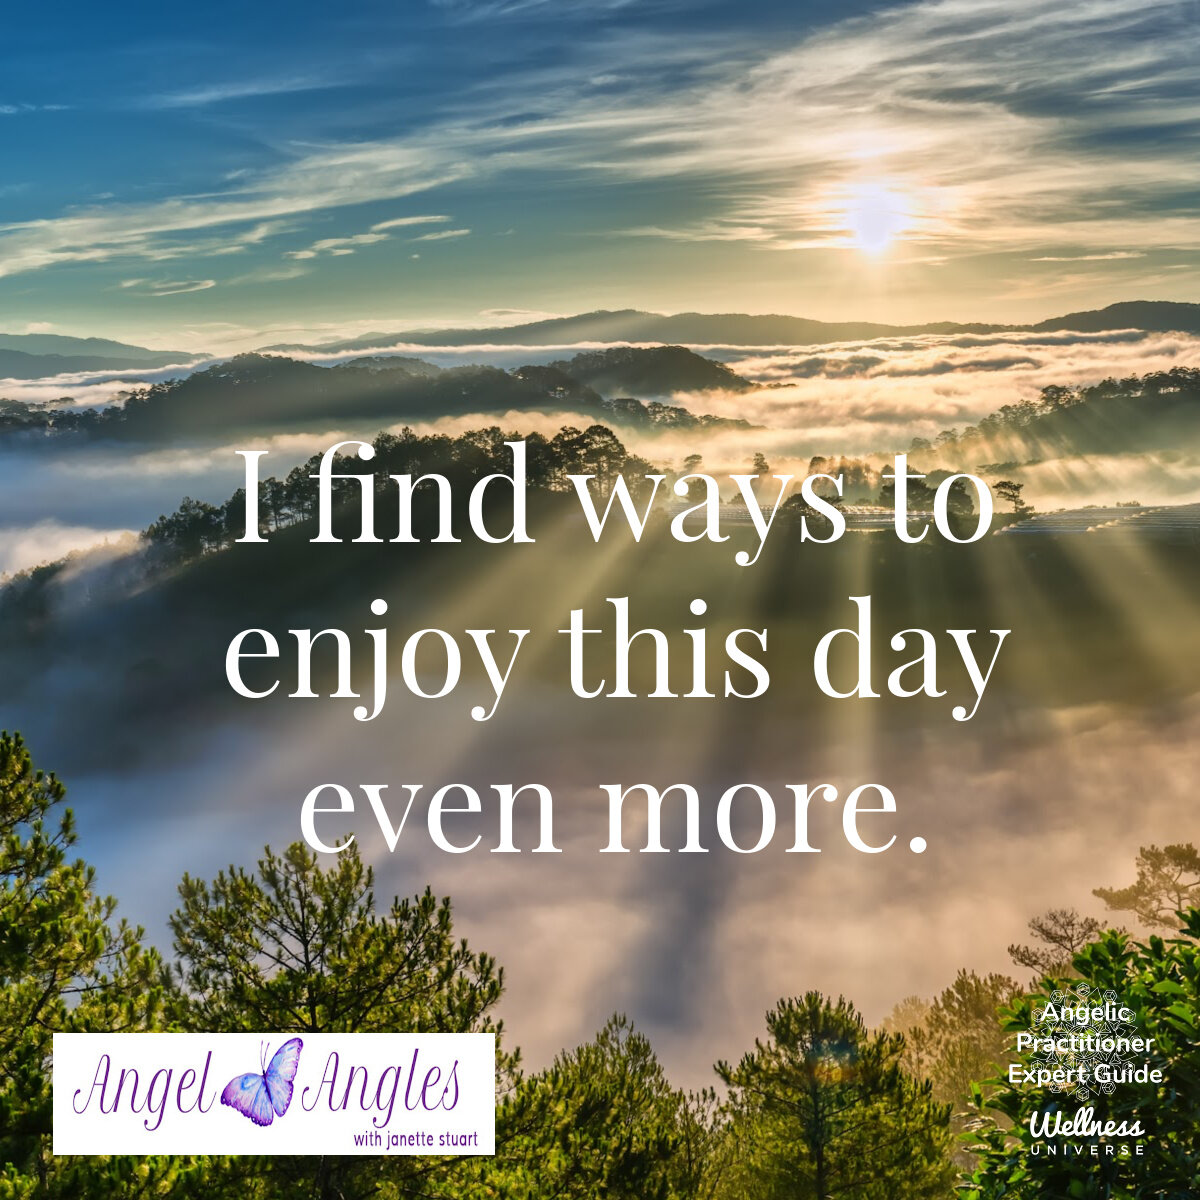 Hello and welcome to your Good Friday 2024 Angel Affirmation. 

I find ways to enjoy this day even more. Yes! Amen, and so it is. 

Blessings of love, joy, and peace.
Love,
Janette 
.
.
#WUVIP #WUWorldChanger #AngelAffirmations #Friday #GoodFriday #F